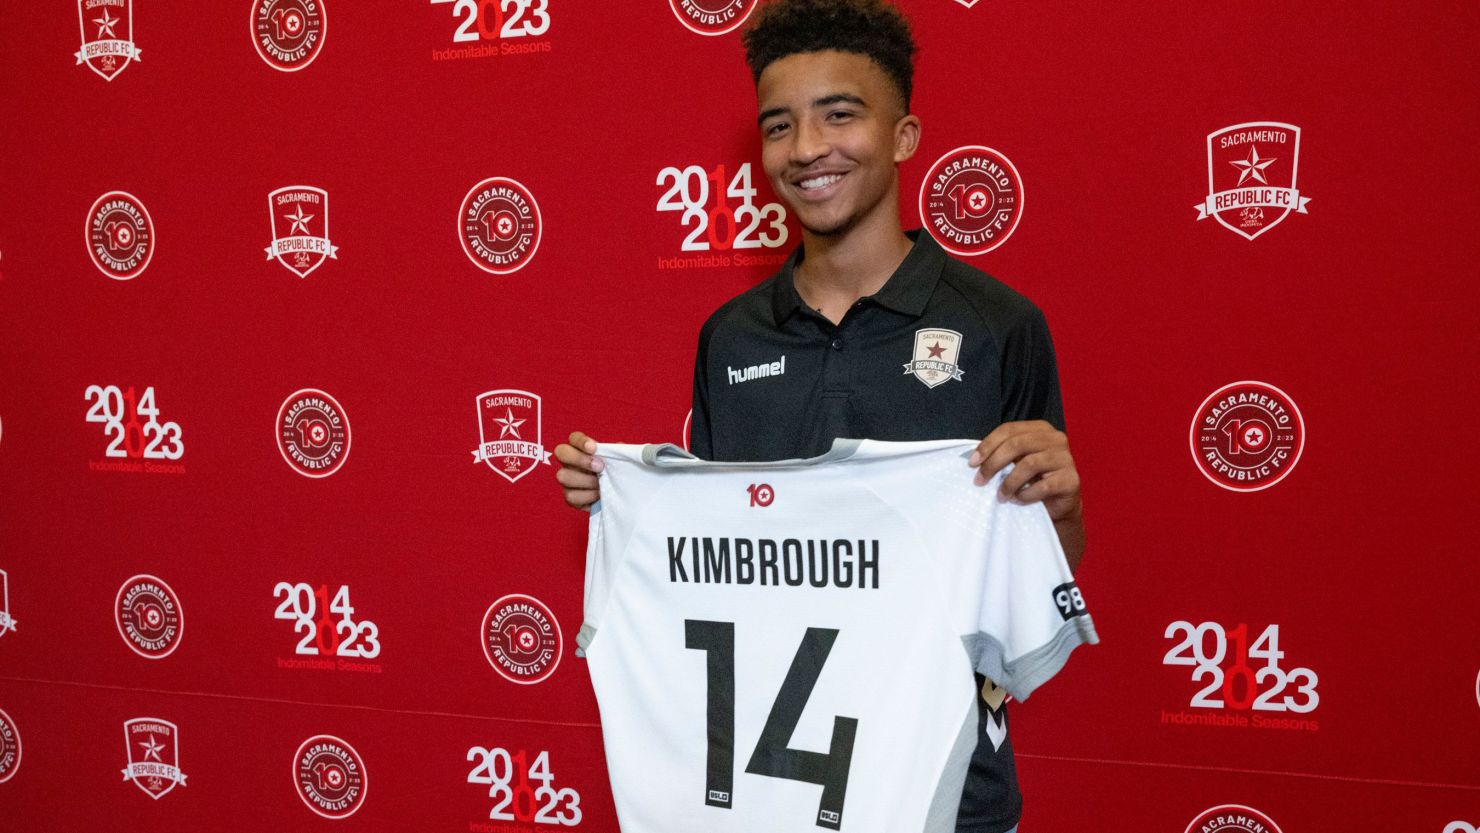 Da'vian Kimbrough, 13, holds up his jersey after signing contract with the Sacramento Republic of the second-tier League Championship of the United Soccer League, Tuesday, Aug. 8, 2023,  in Sacramento, Calif. (Paul Kitagaki Jr./The Sacramento Bee via AP)